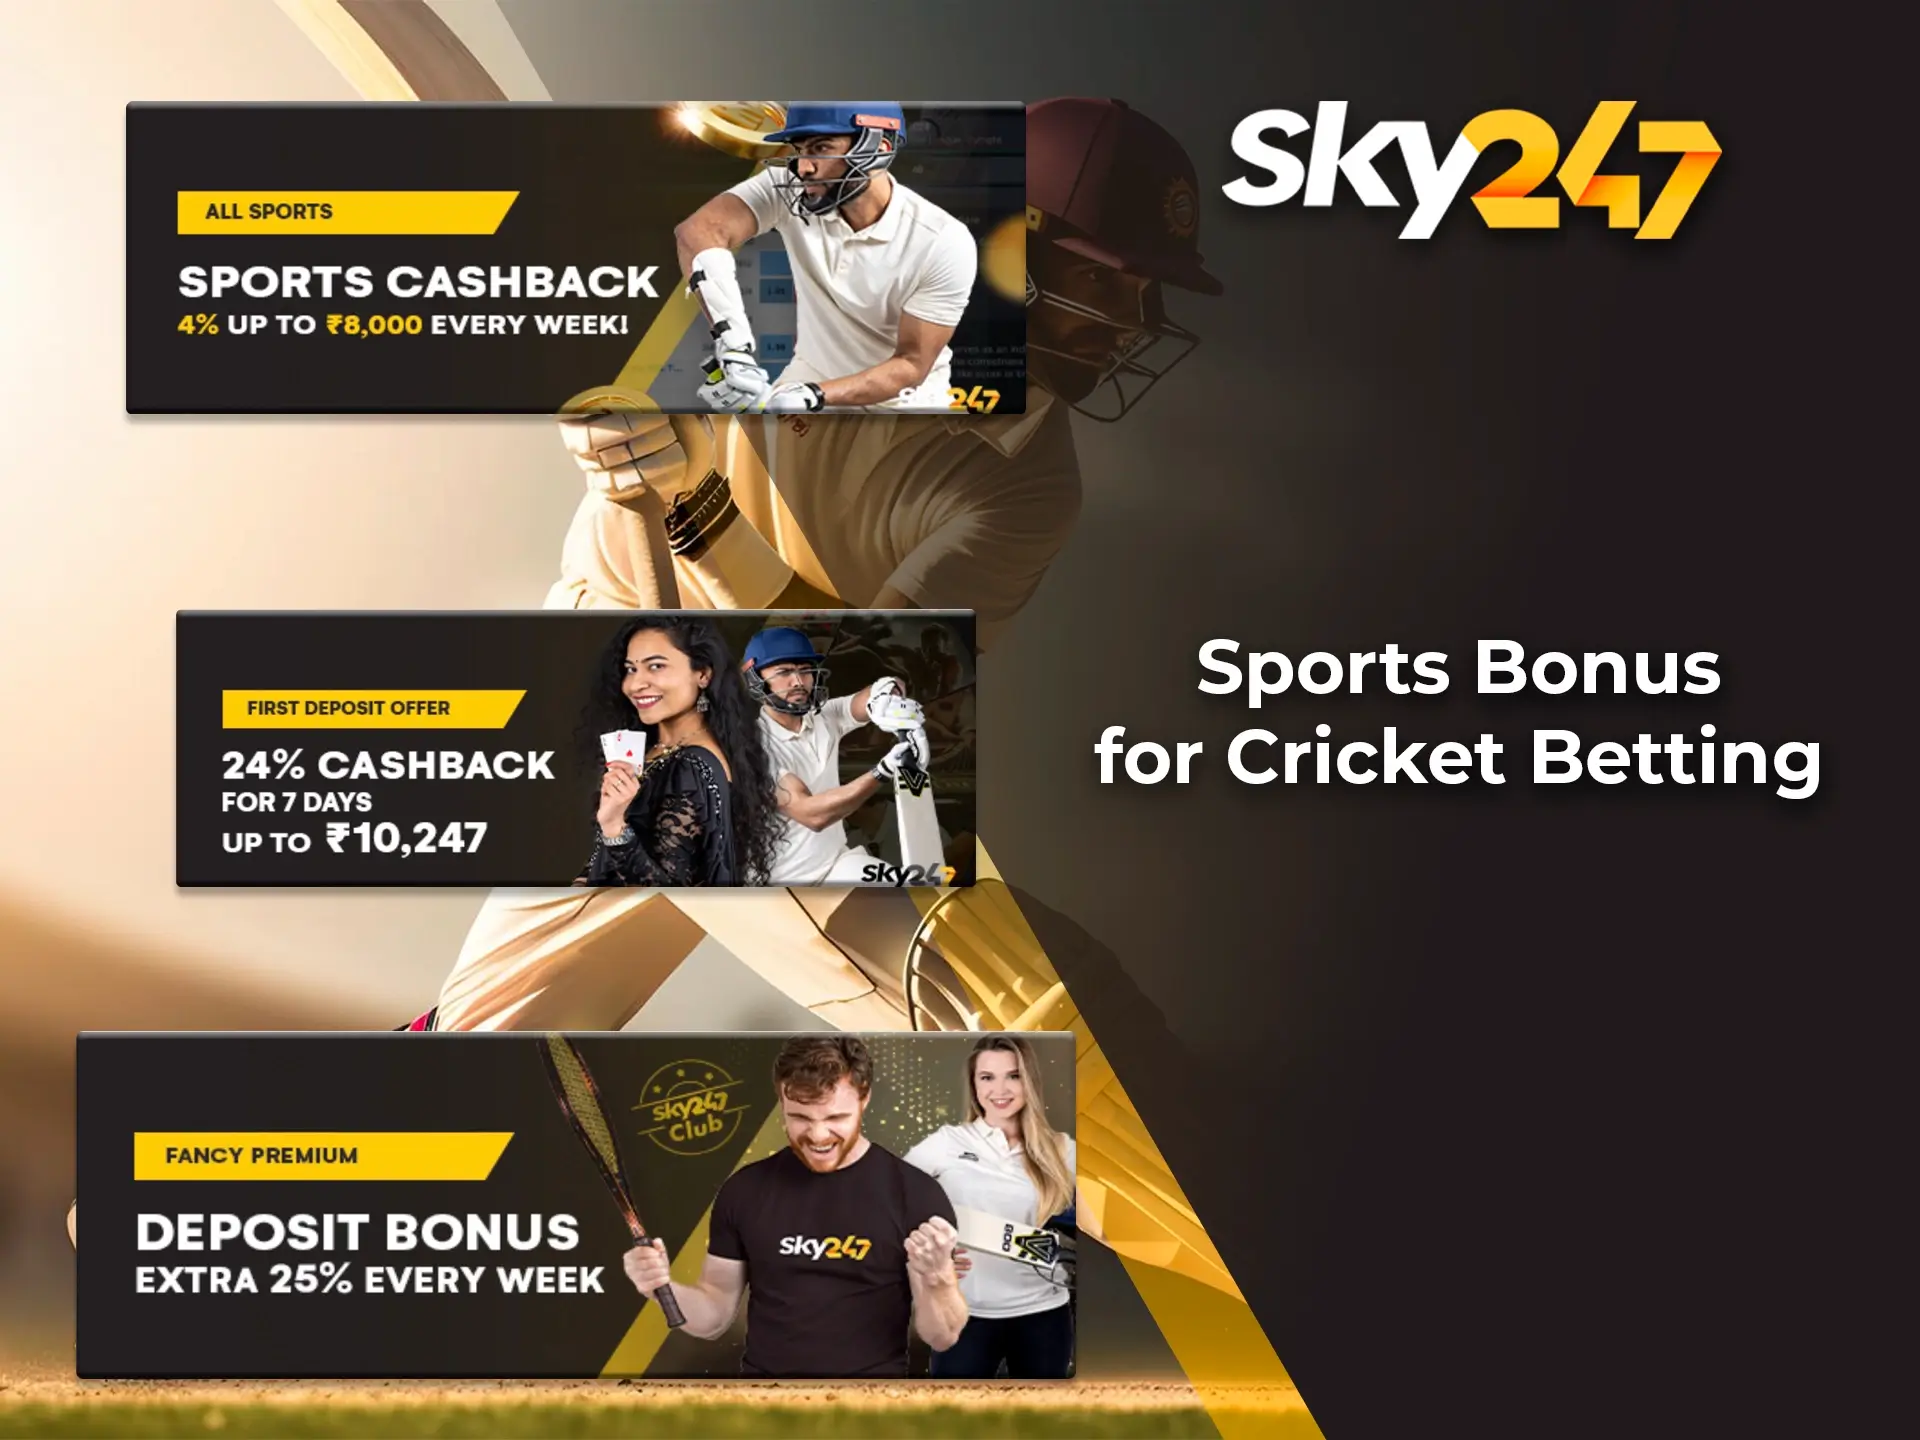 Use bonuses from bookmaker Sky247 to bet and win big.